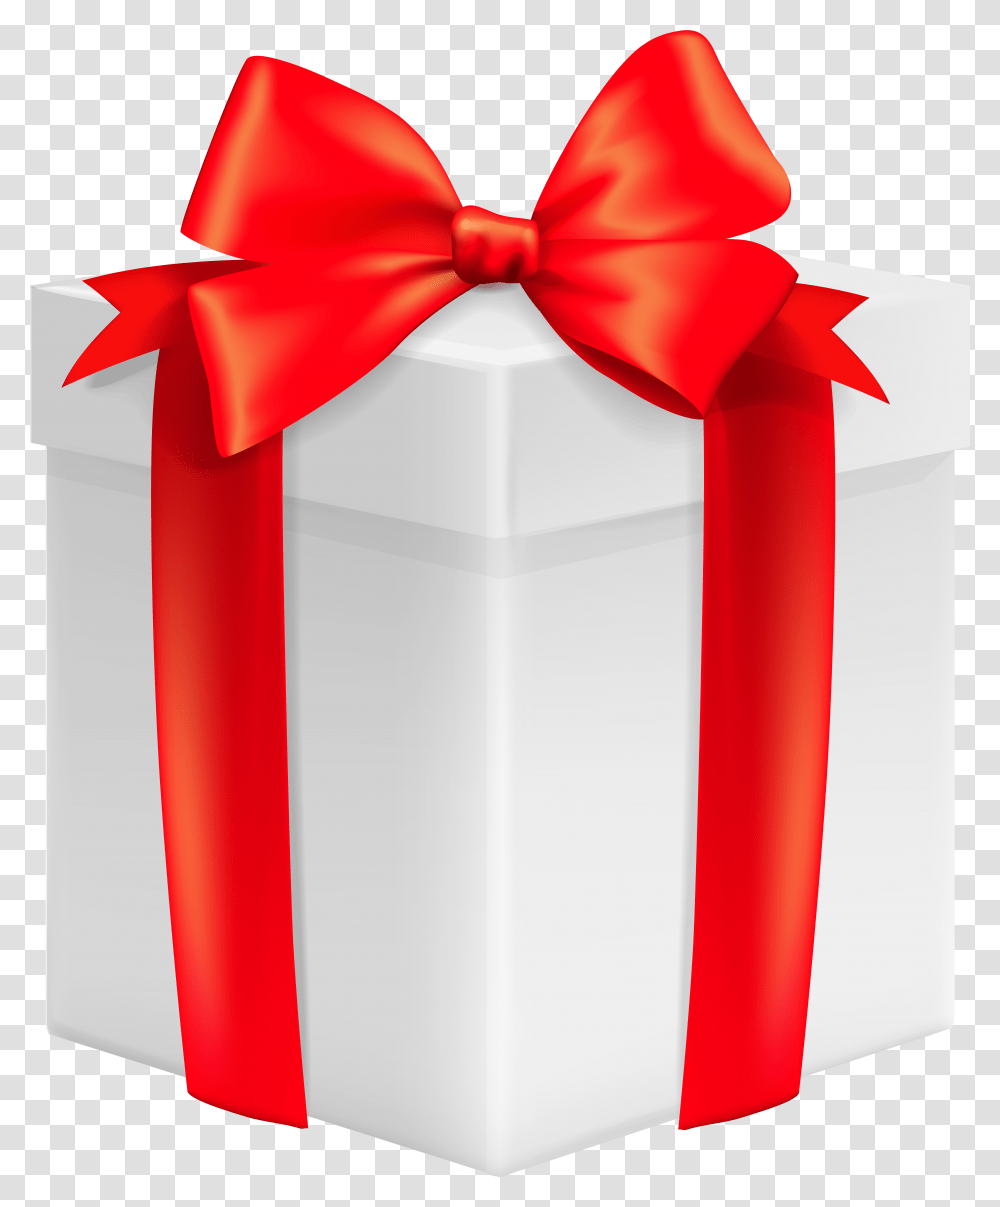 White Gift Box Clip Art Image Gallery Yopriceville Transparent Png